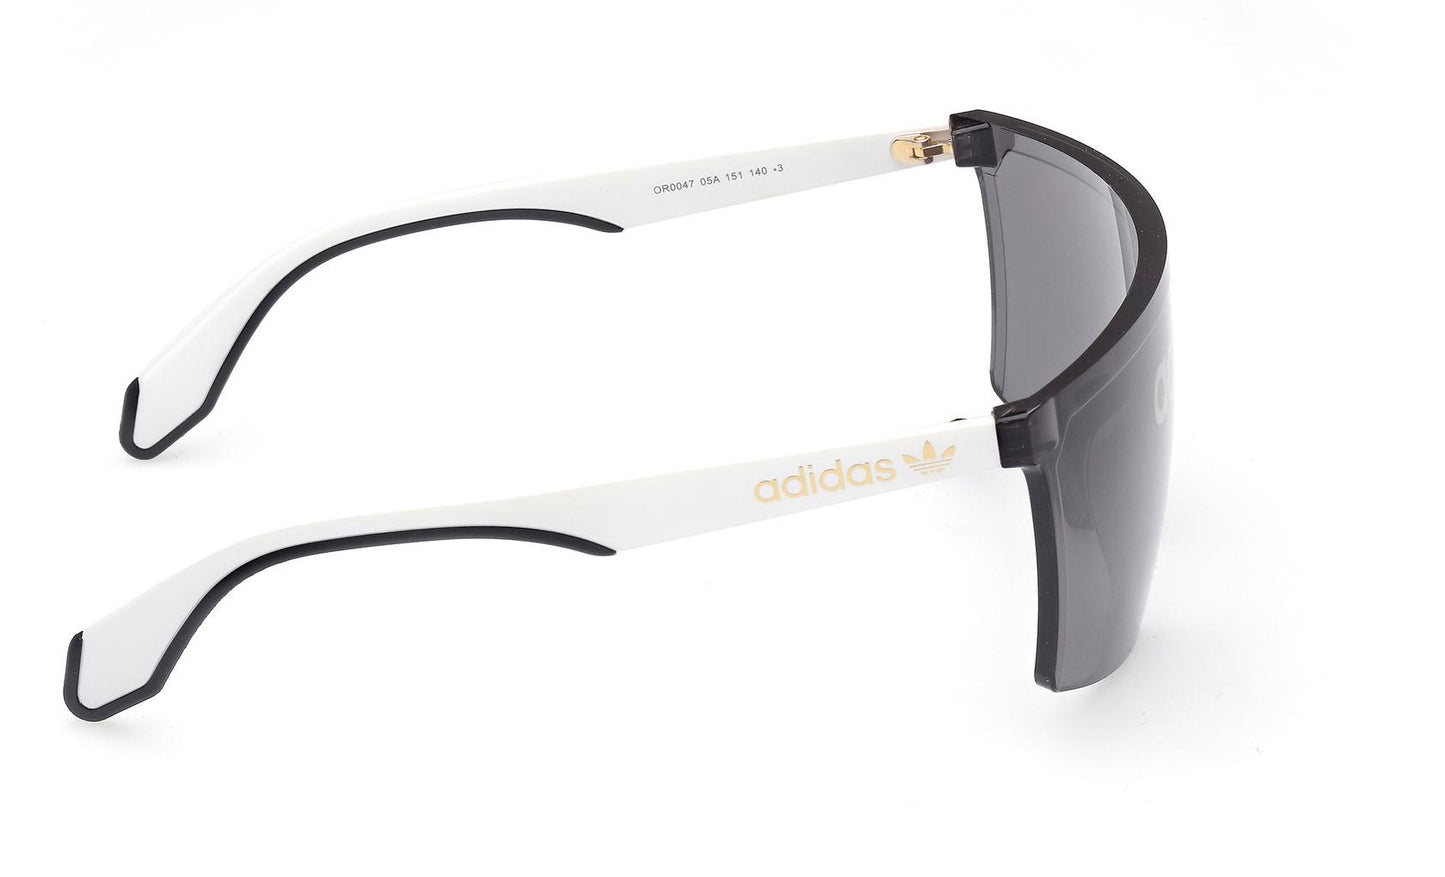 Load image into Gallery viewer, Adidas Originals Sunglasses OR0047 05A
